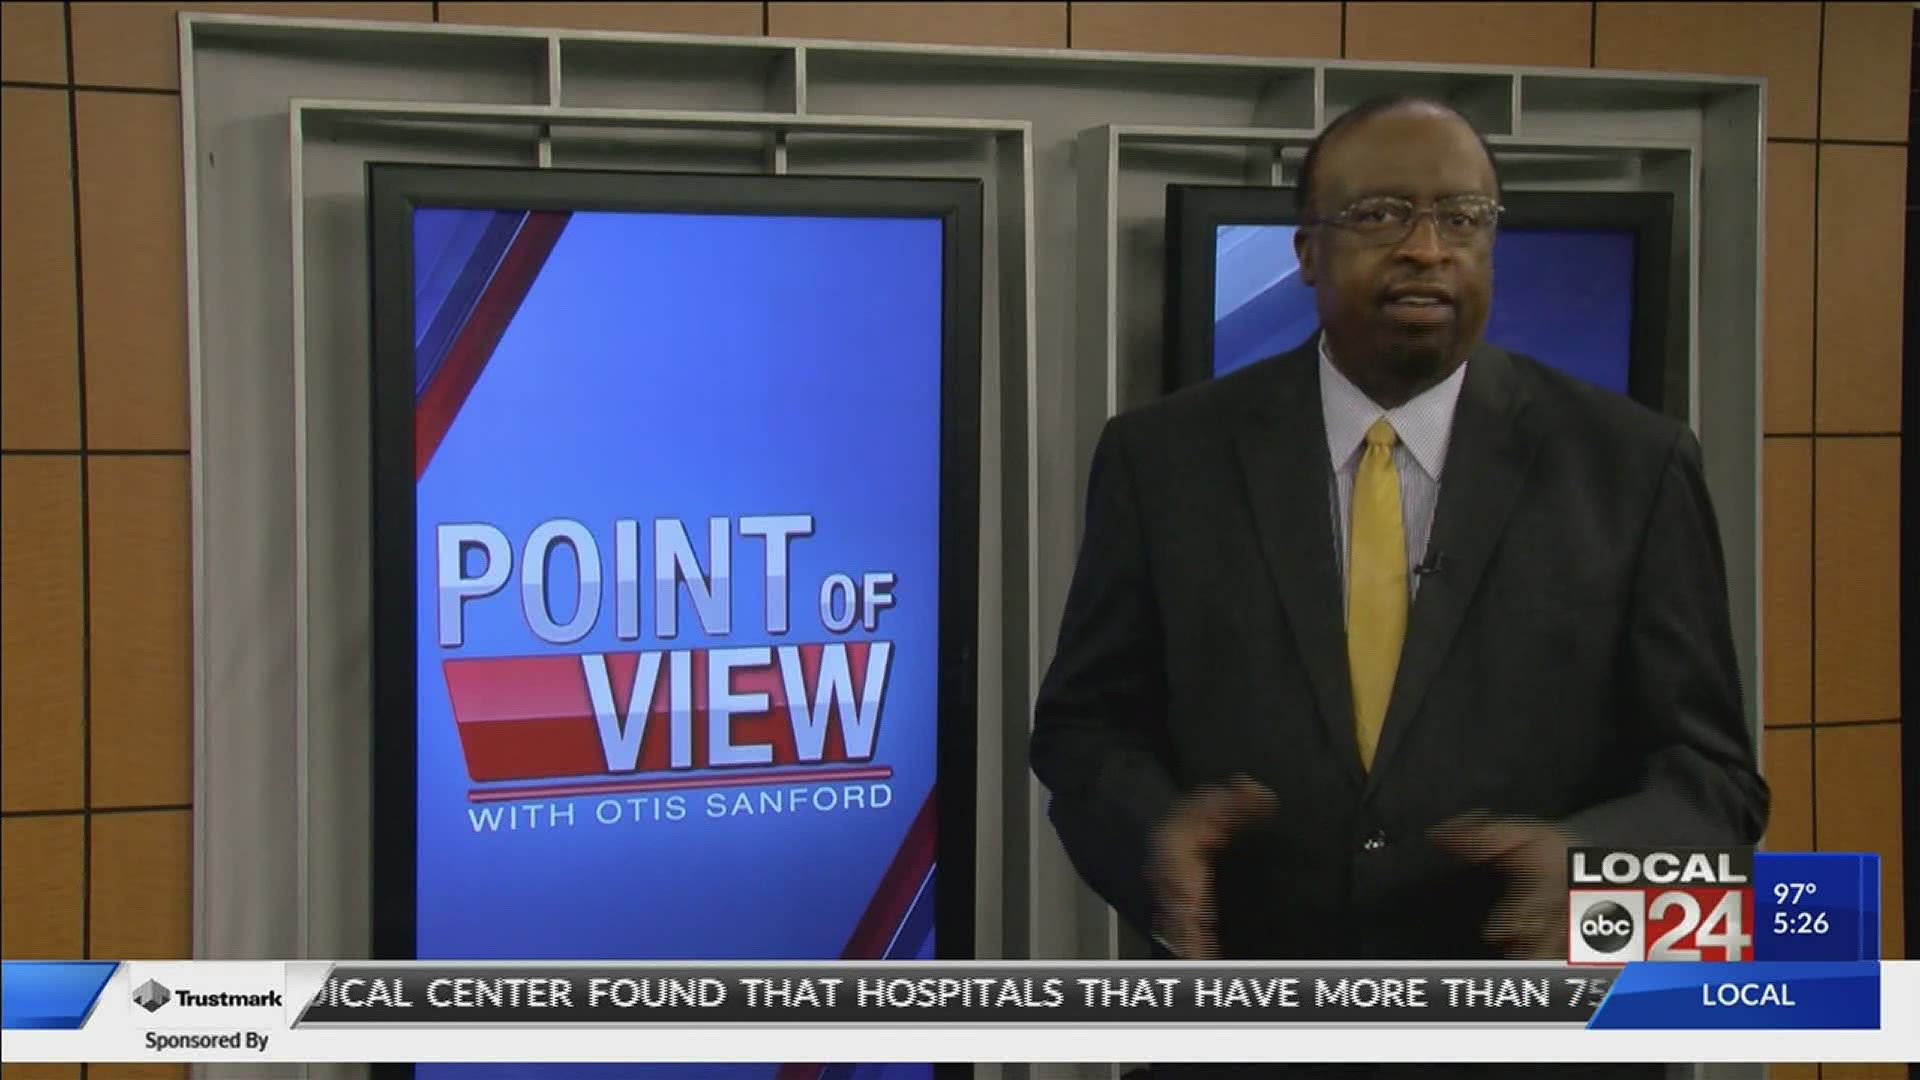 Local 24 News political analyst and commentator Otis Sanford shares his point of view on the race for Sen. Lamar Alexander’s U.S. Senate seat.